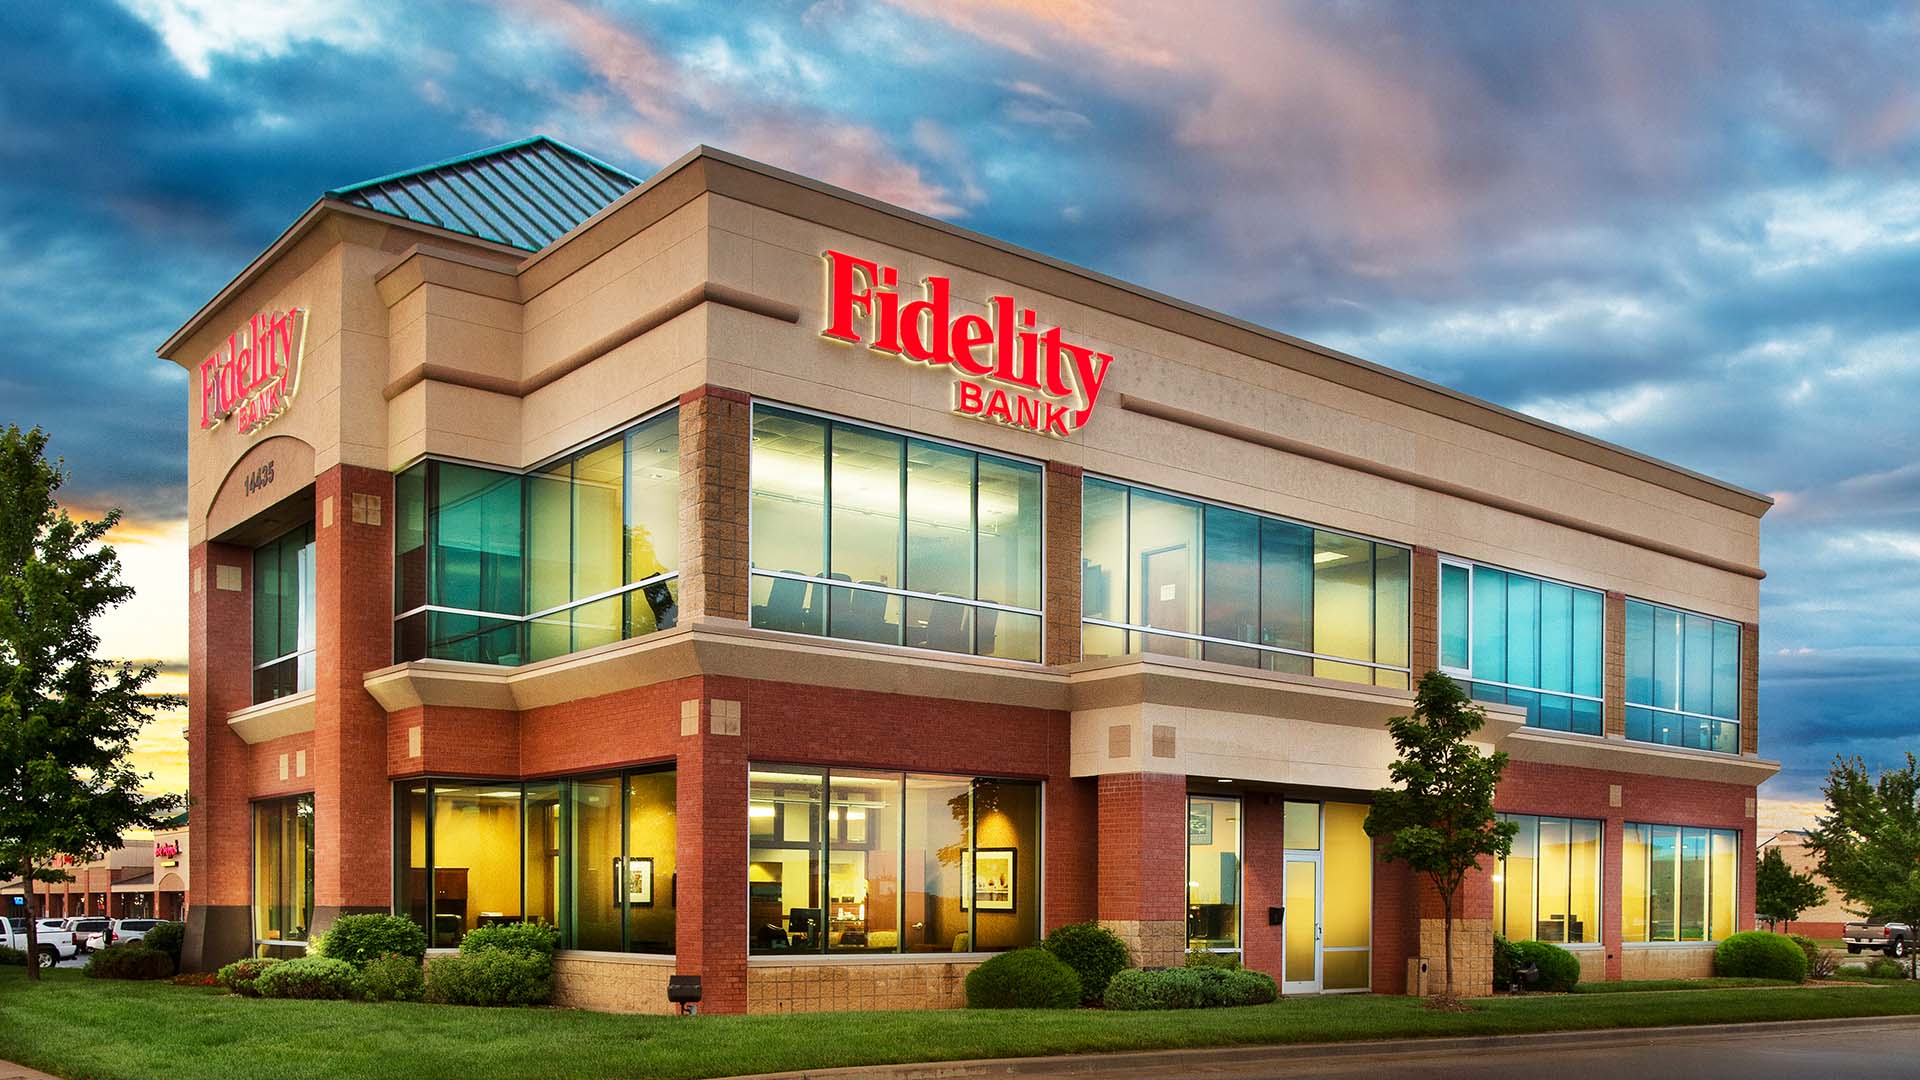 Fidelity Bank Announces Purchase, Renovation Of Iconic Electric Building  for New Corporate Headquarters